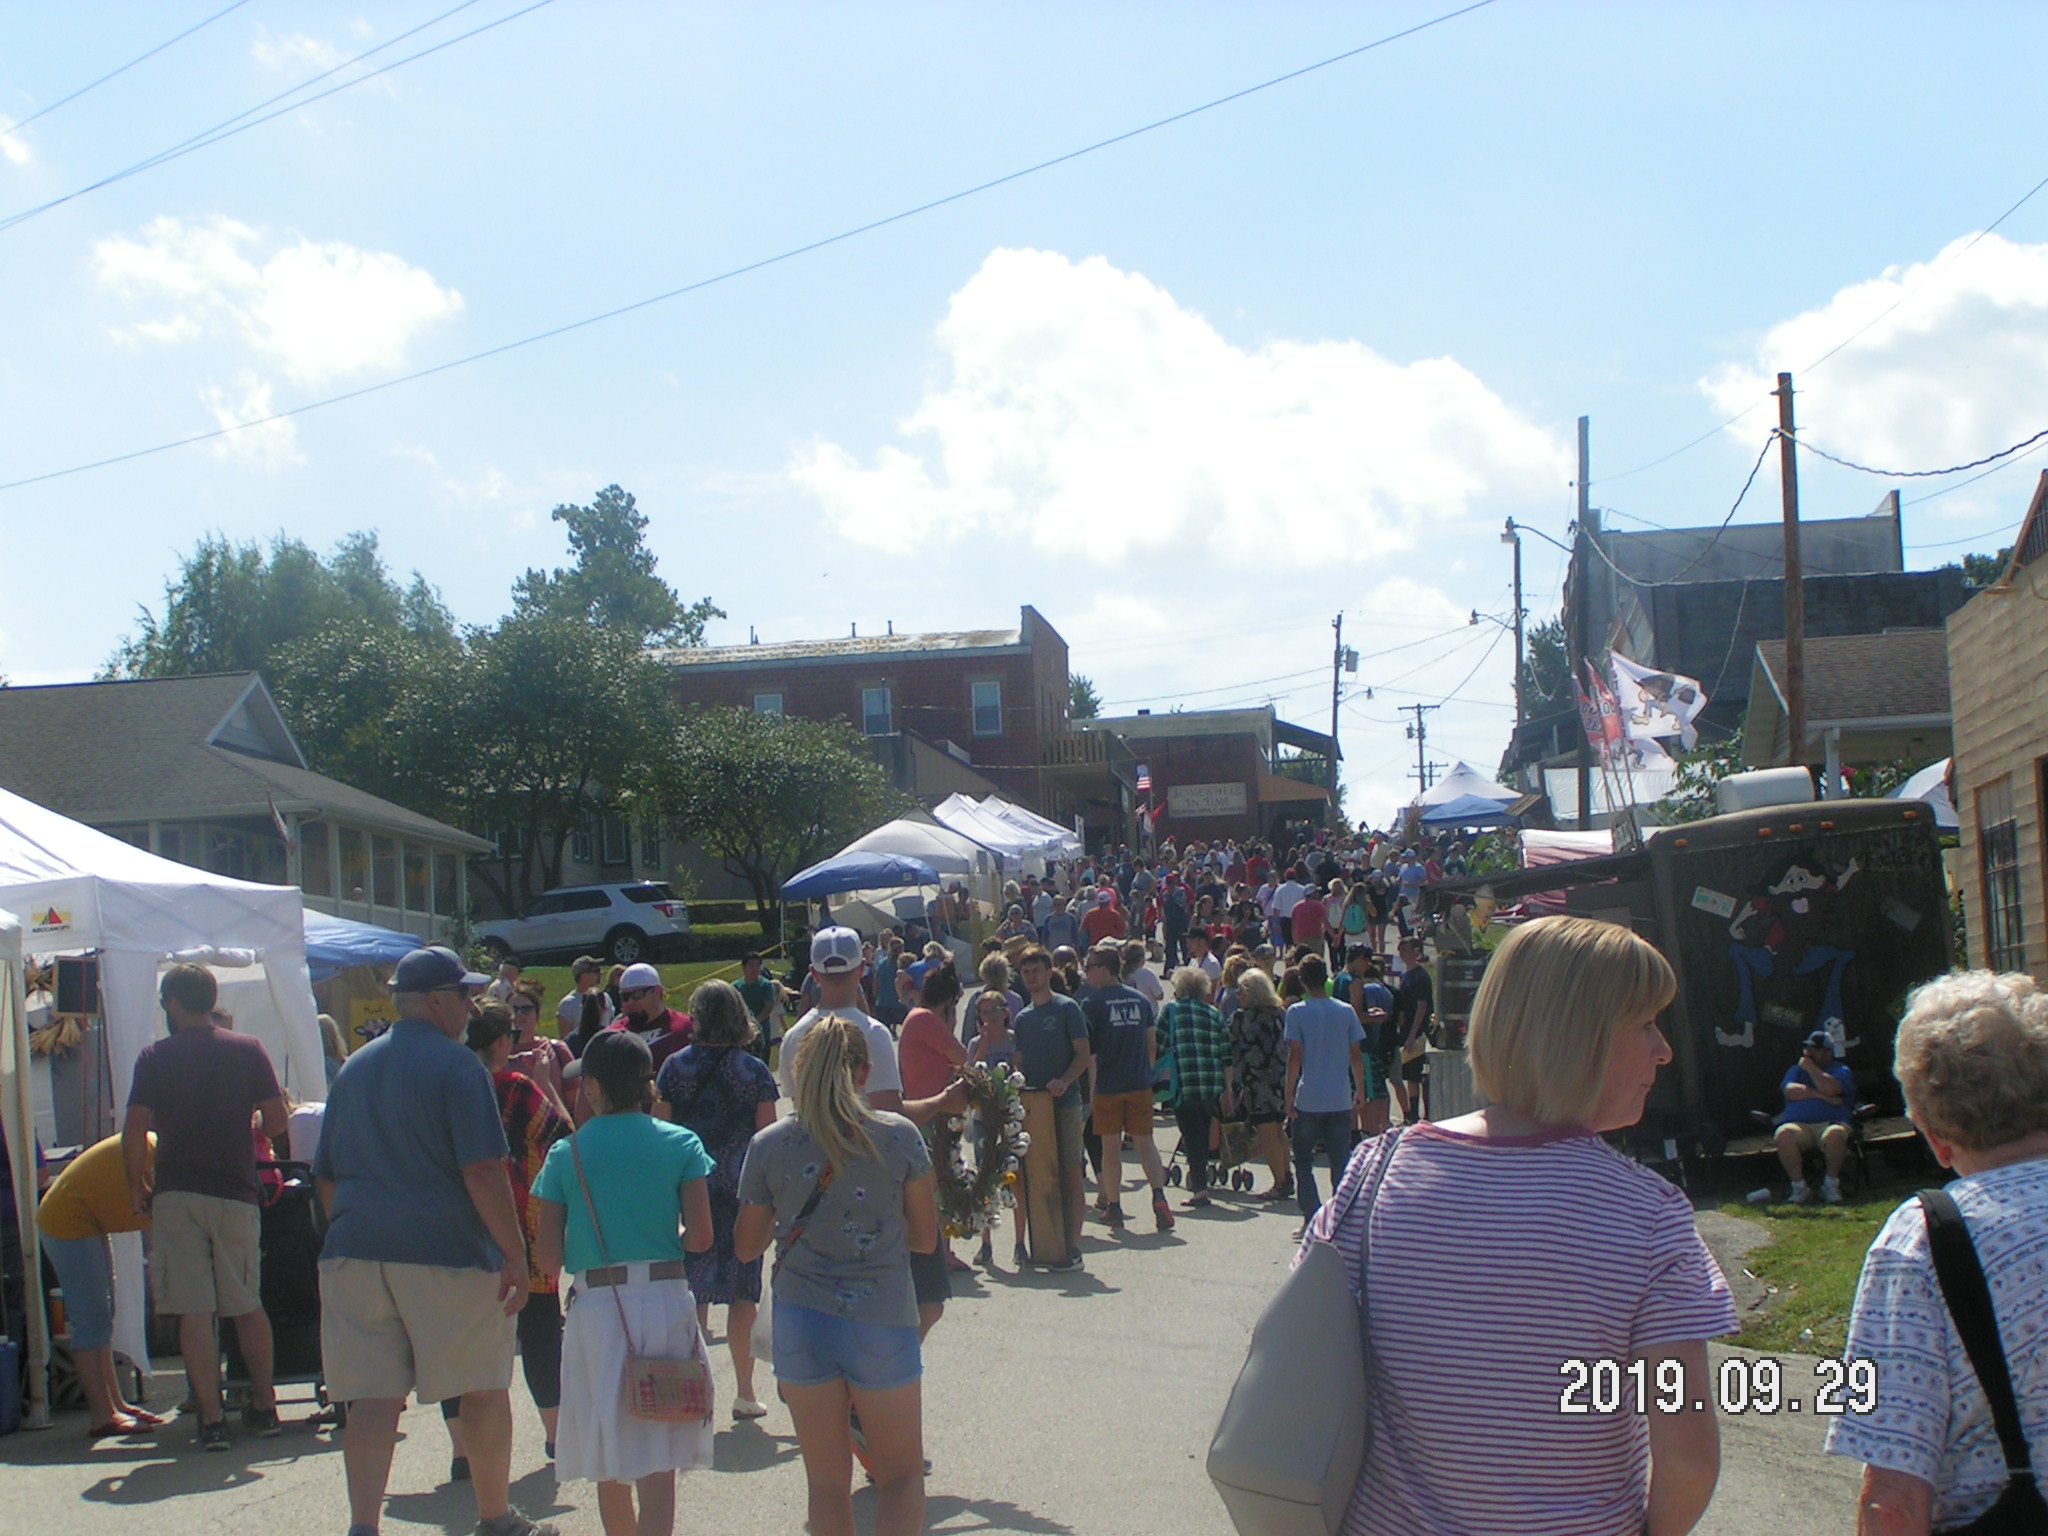 Main Street view during the Reunion